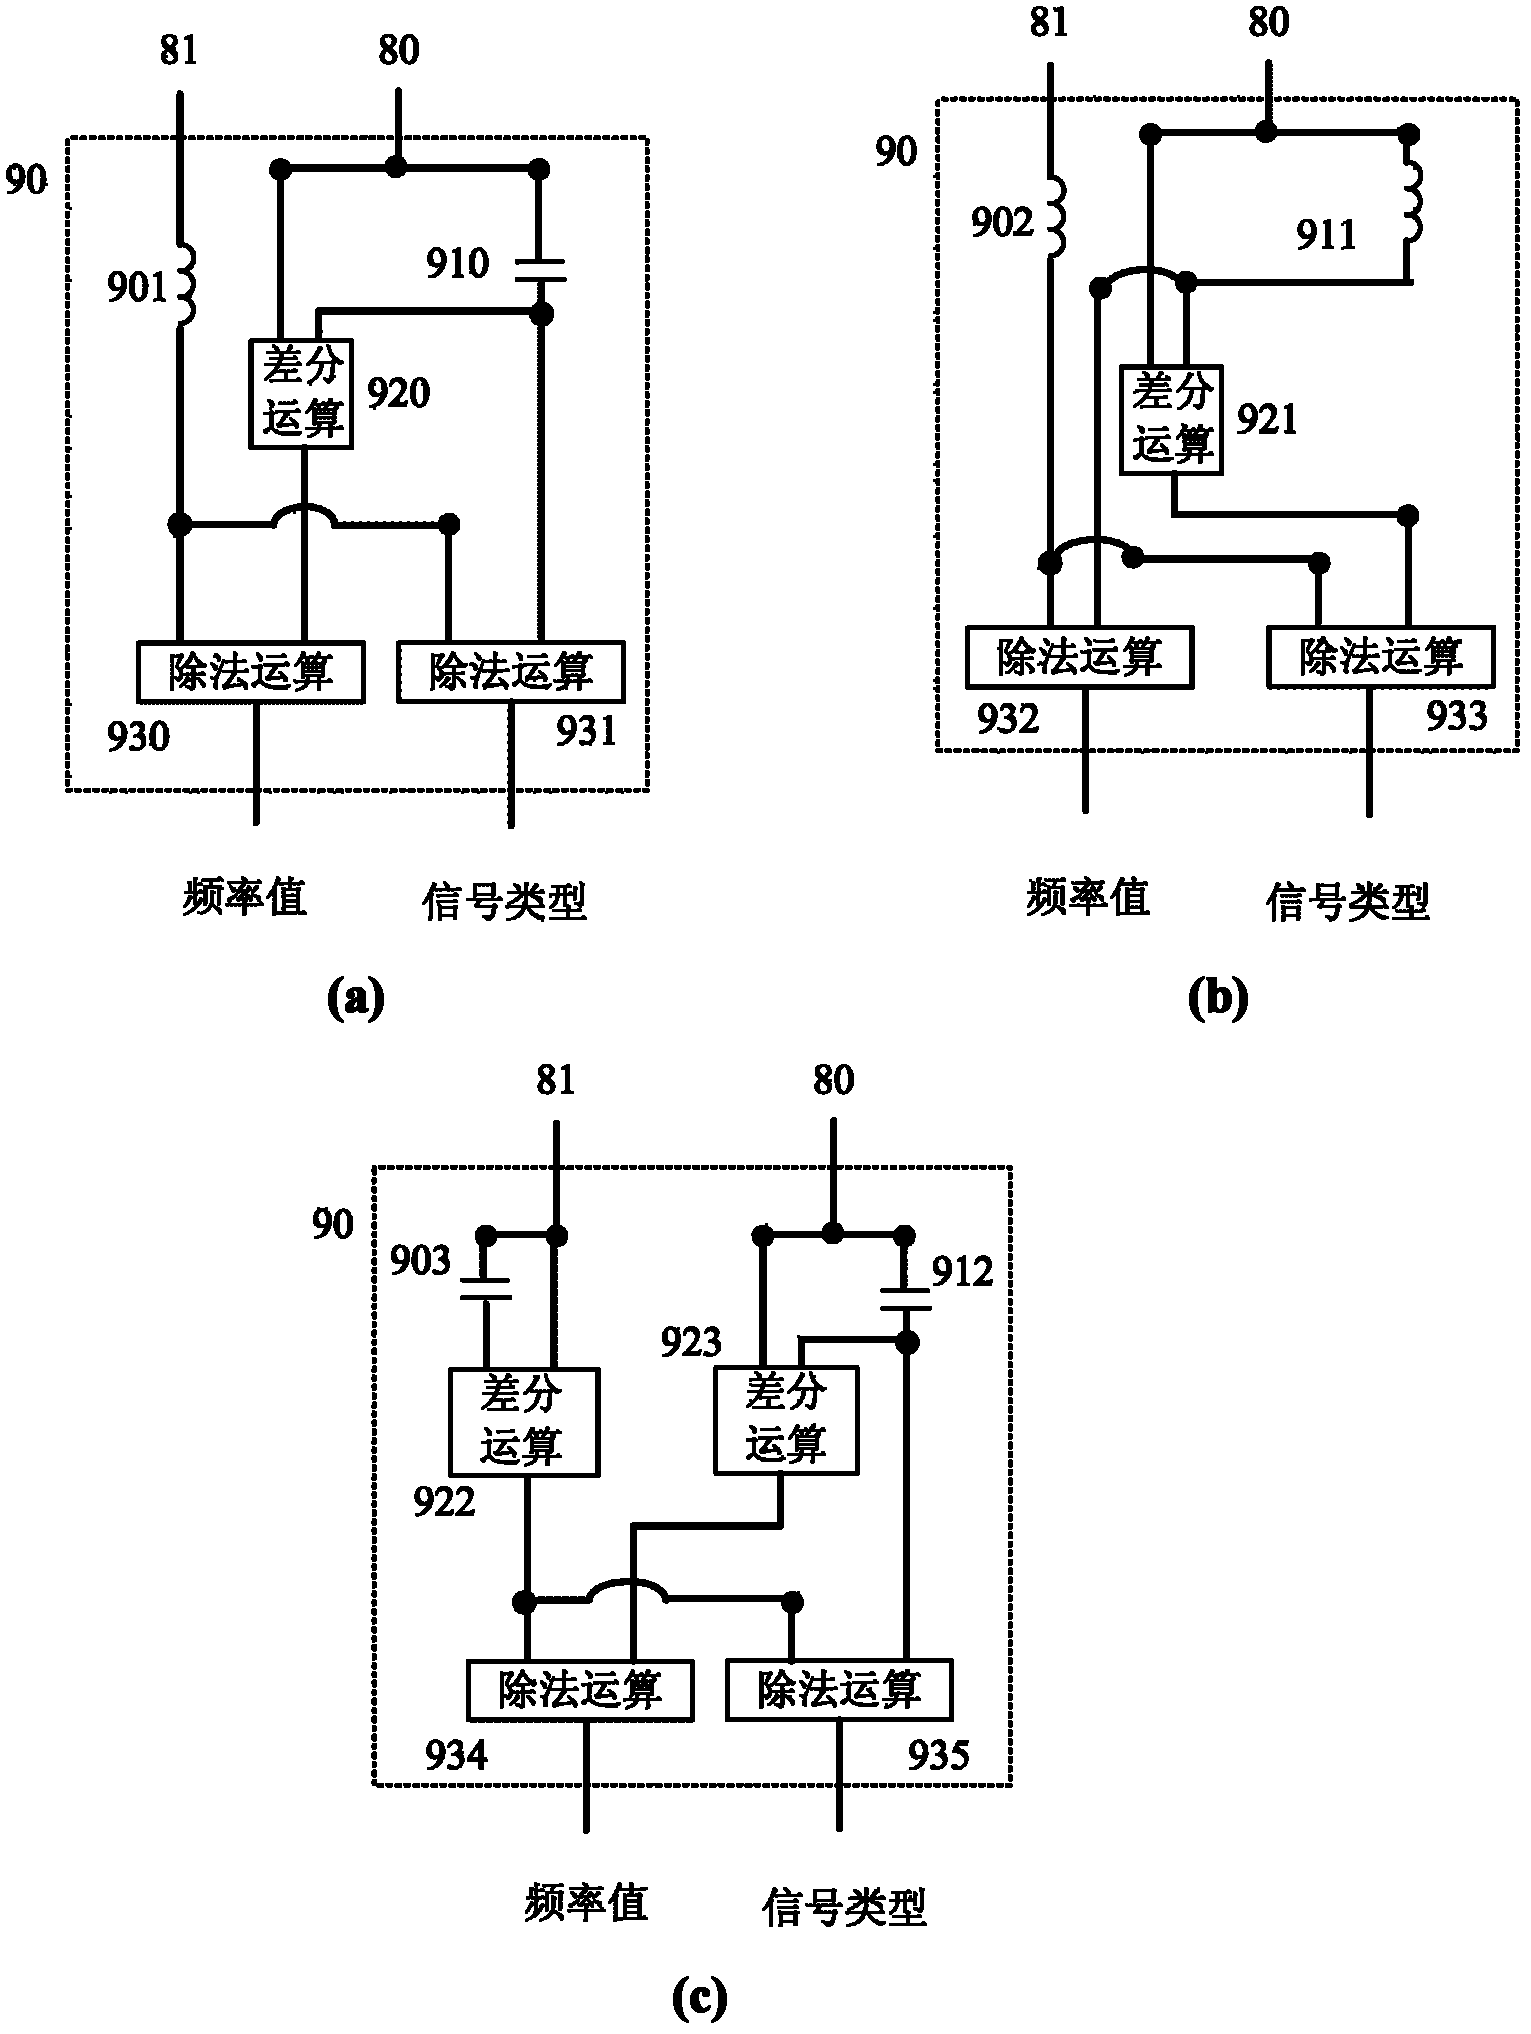 Method and device for detecting microwave signal types and frequency based on photon technology